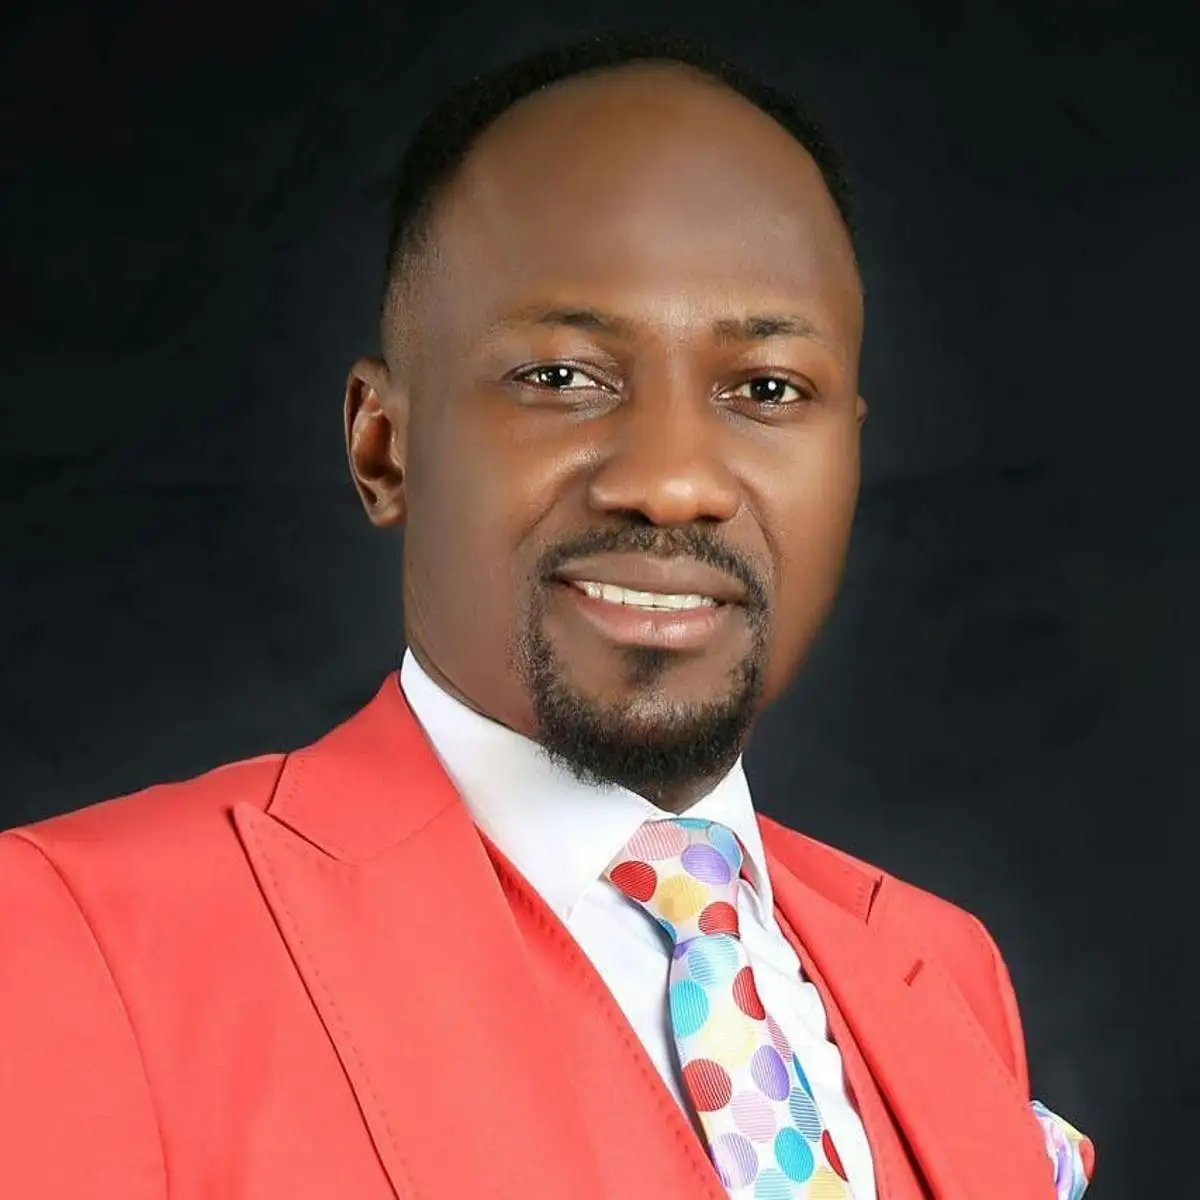 Apostle Johnson Suleman Reveals What He Will Do If He Wife Tells Him To Fight